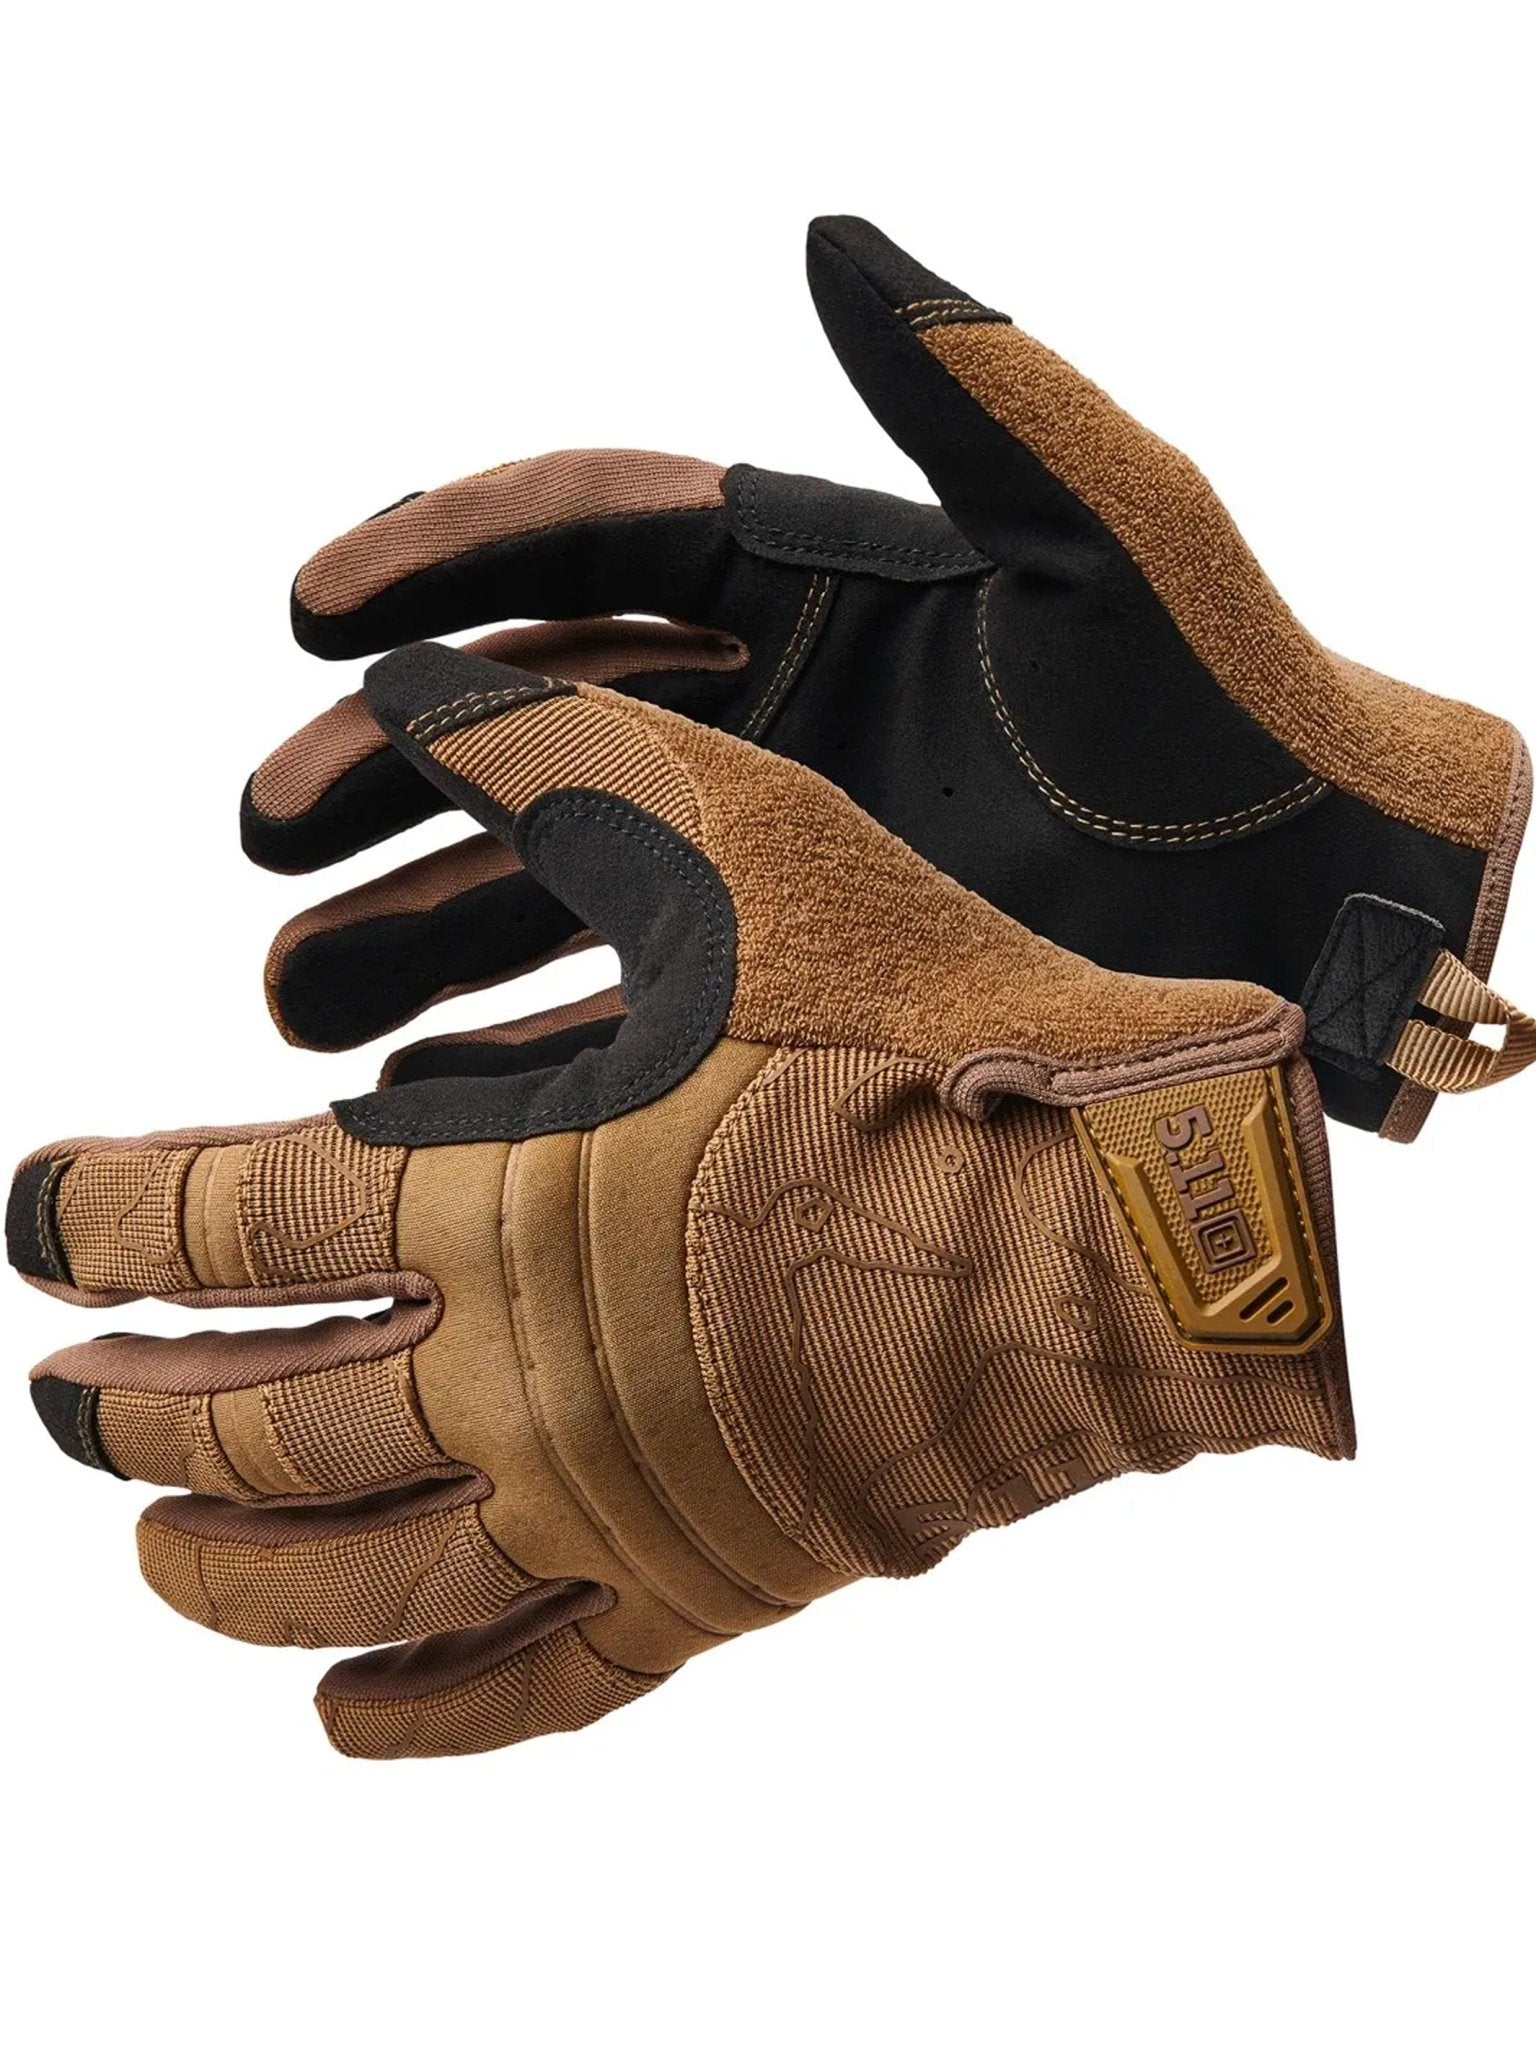 4elementsclothing5.11 Tactical5.11 Tactical - 5.11 COMPETITION SHOOTING 2.0 GLOVE - Touchscreen taper wrap gloves, Nylon EN388:2016- 3111X; EN ISO 21420 - Style 59394Gloves59394-134-S